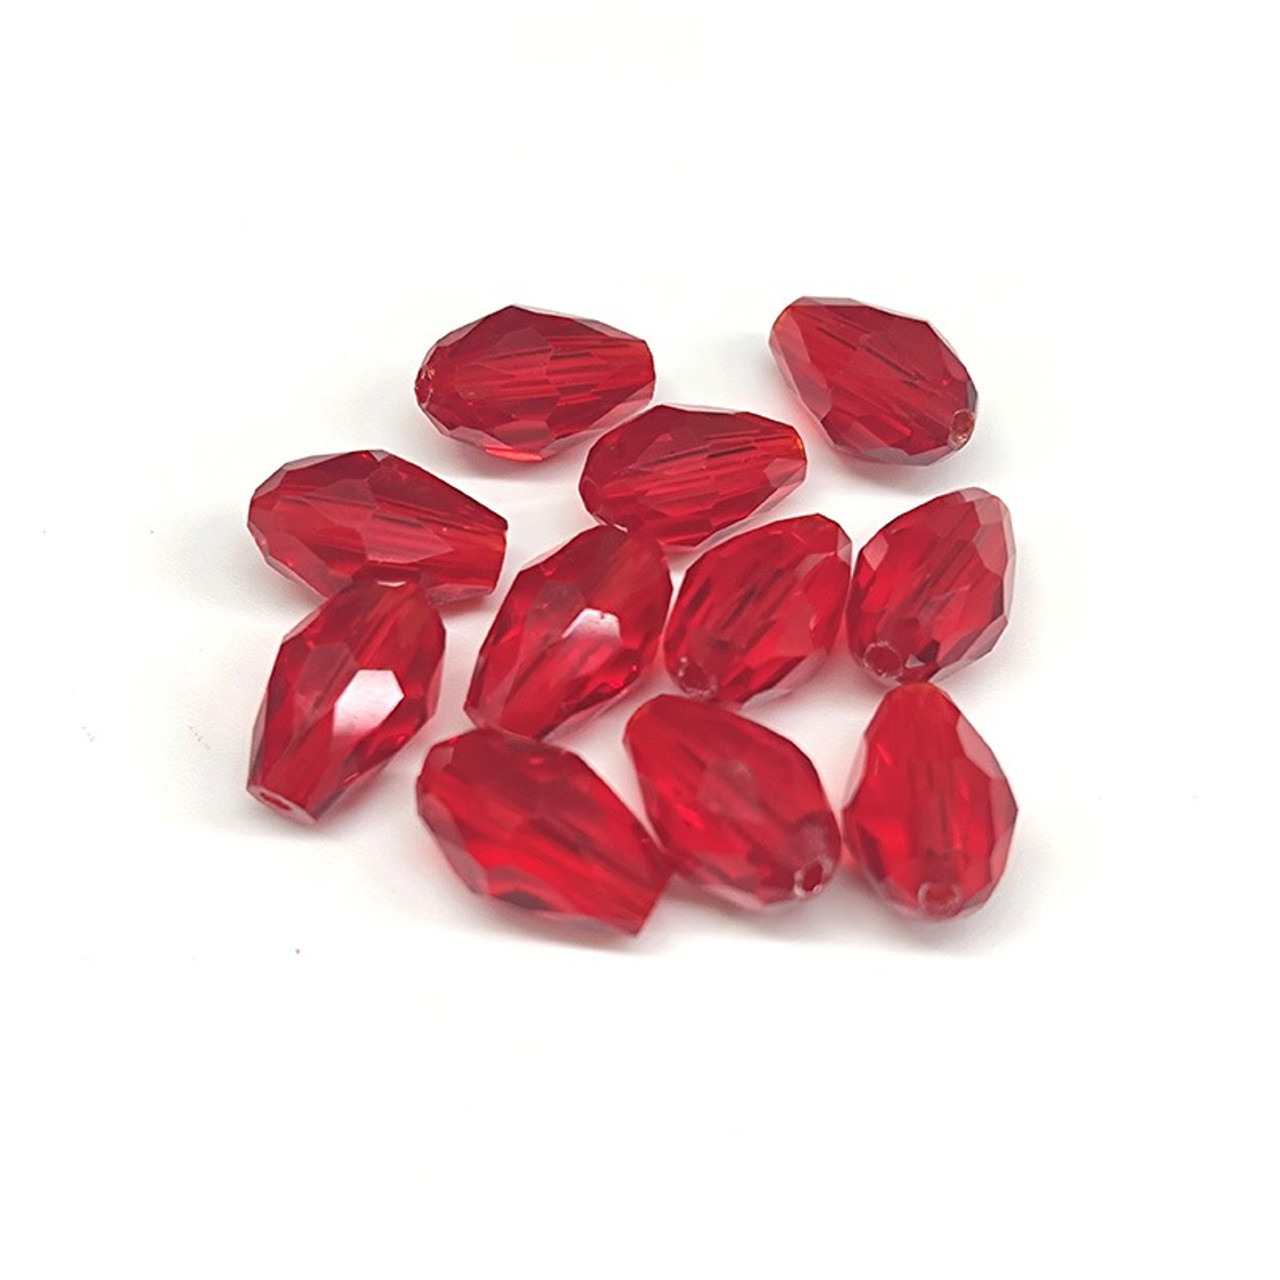 29 12mm Red Faceted Glass Teardrop Beads with AB Finish